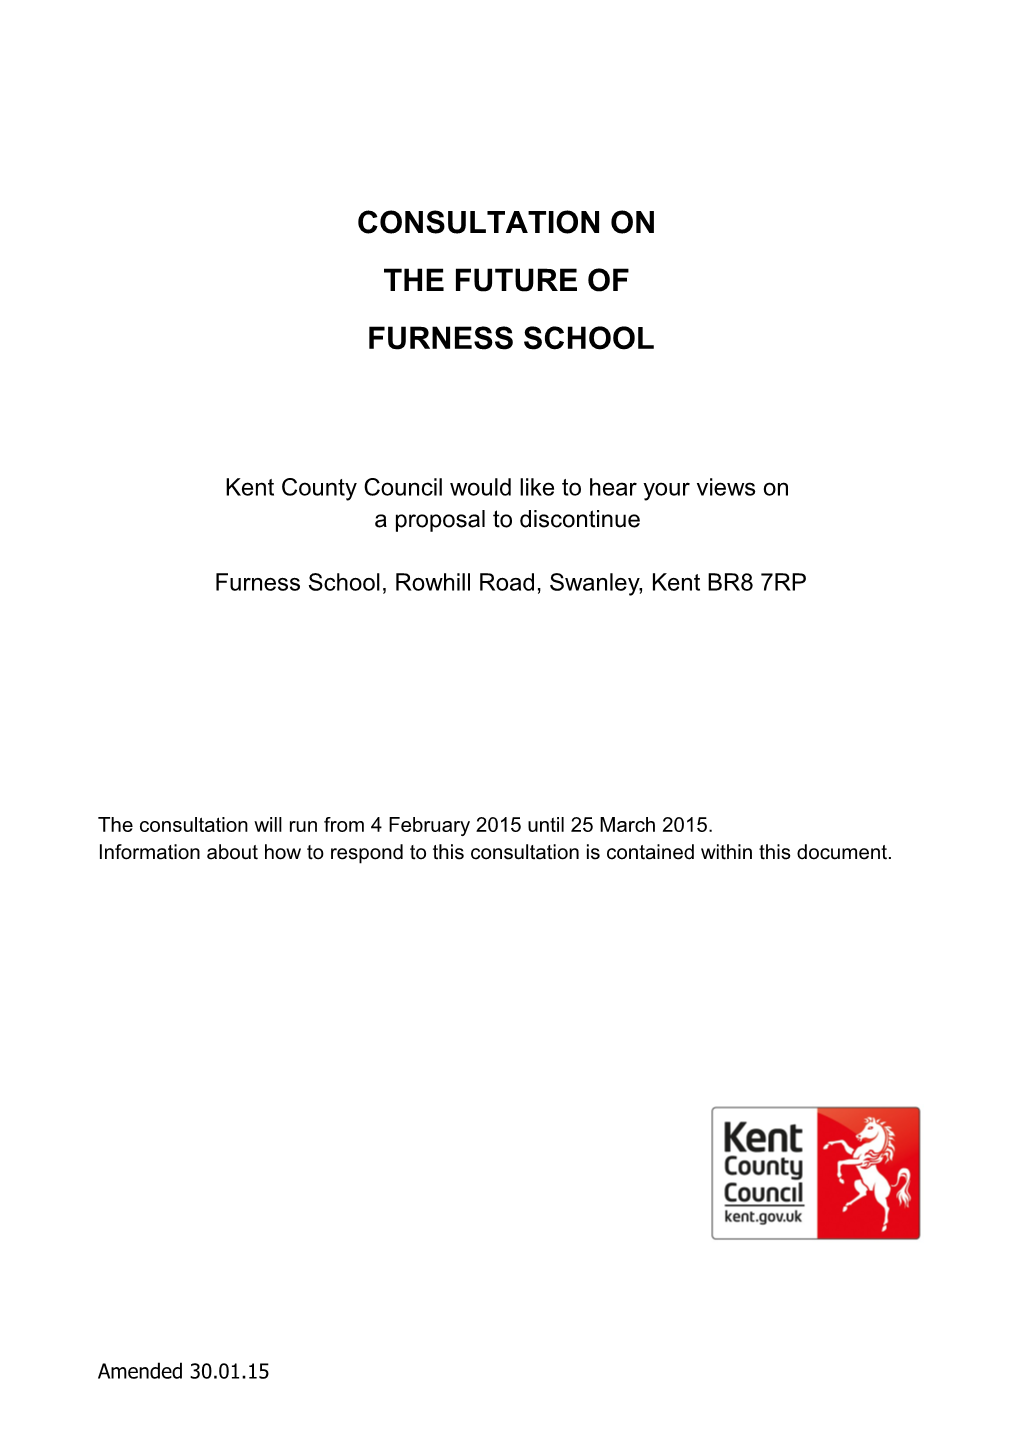 Kent County Council Would Like to Hear Your Views On